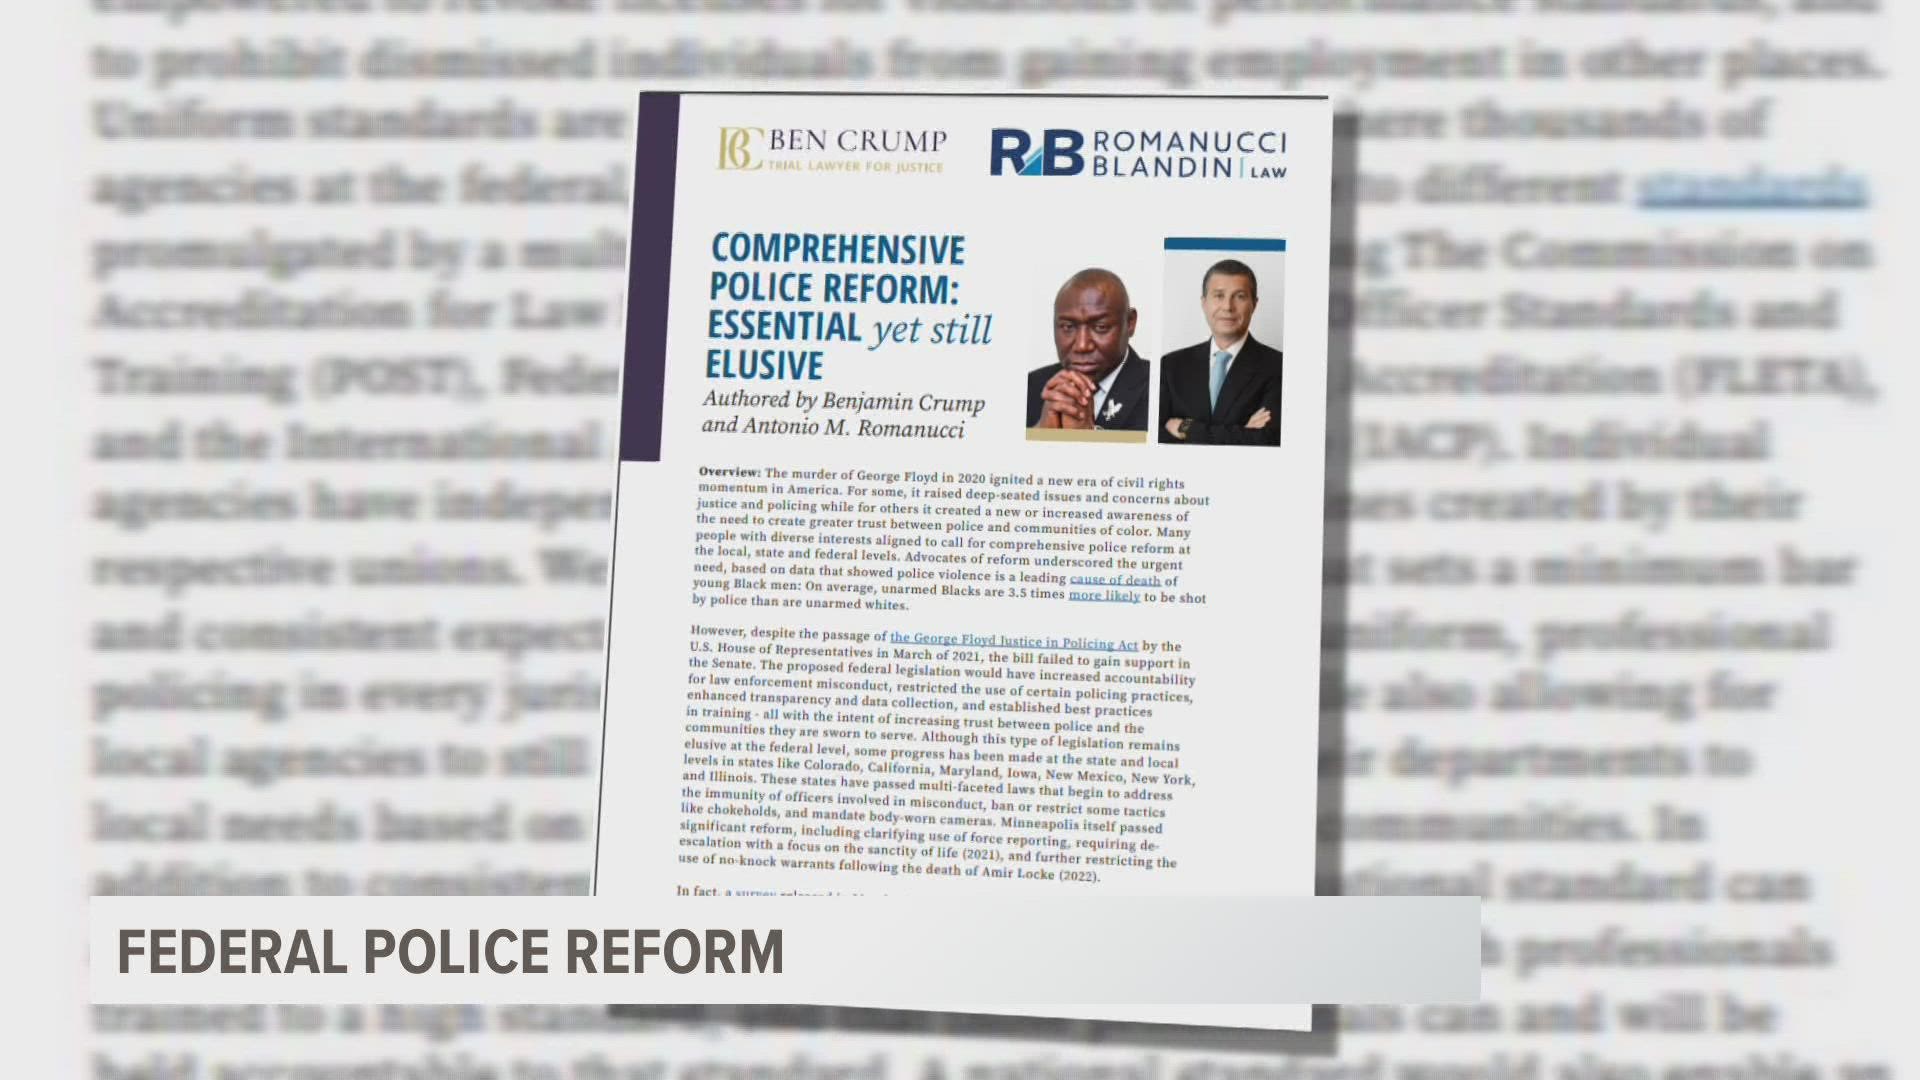 The "White Paper," written by attorneys Ben Crump and Antonio Romanucci, lays out comprehensive police reform with a goal of removing "the bad apples."